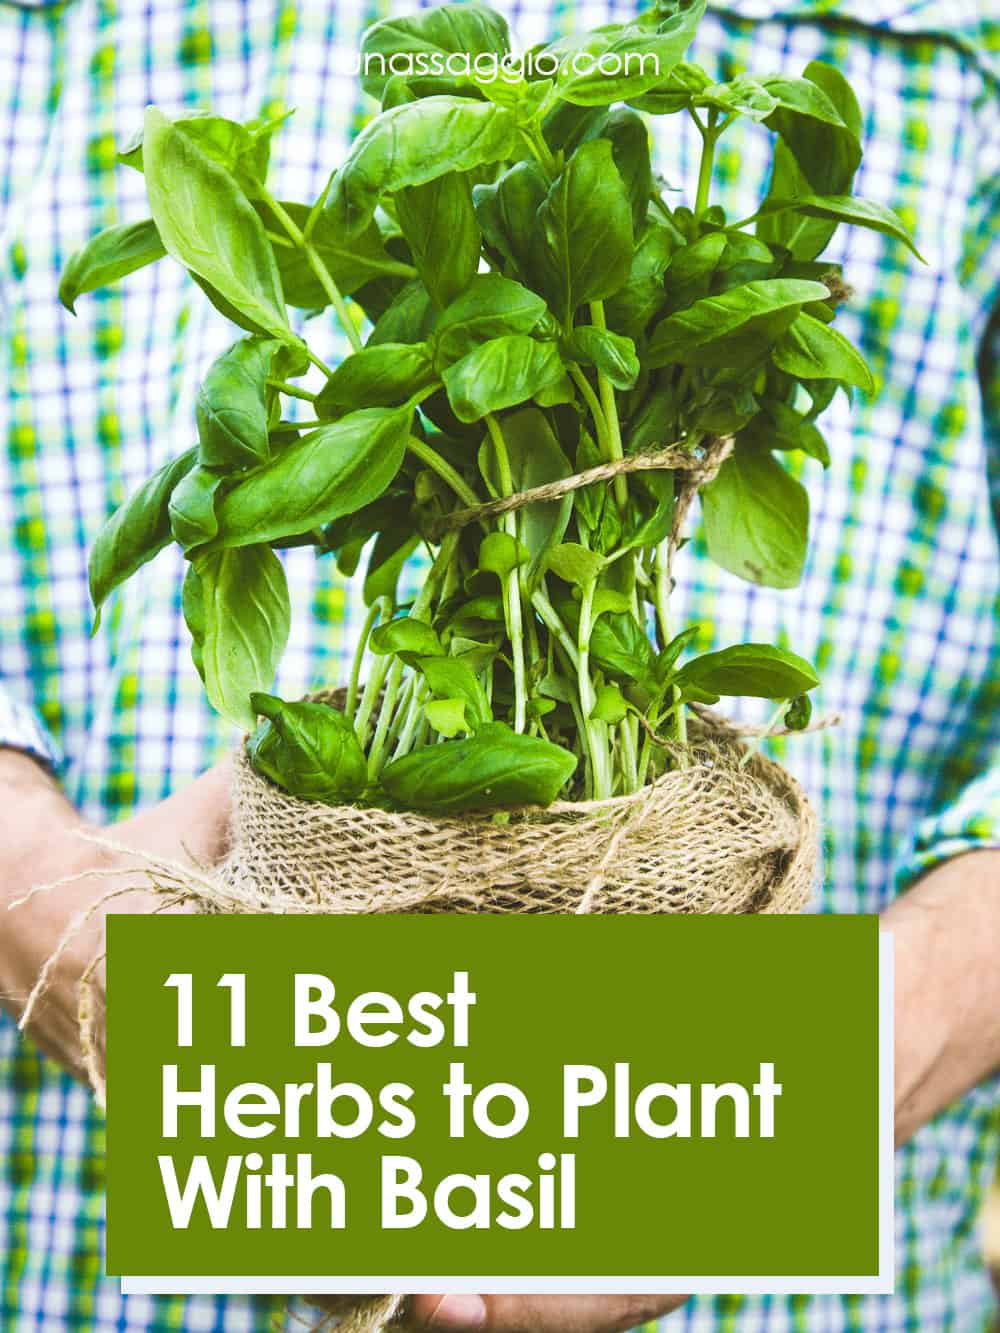 11 Best Herbs to Plant With Basil